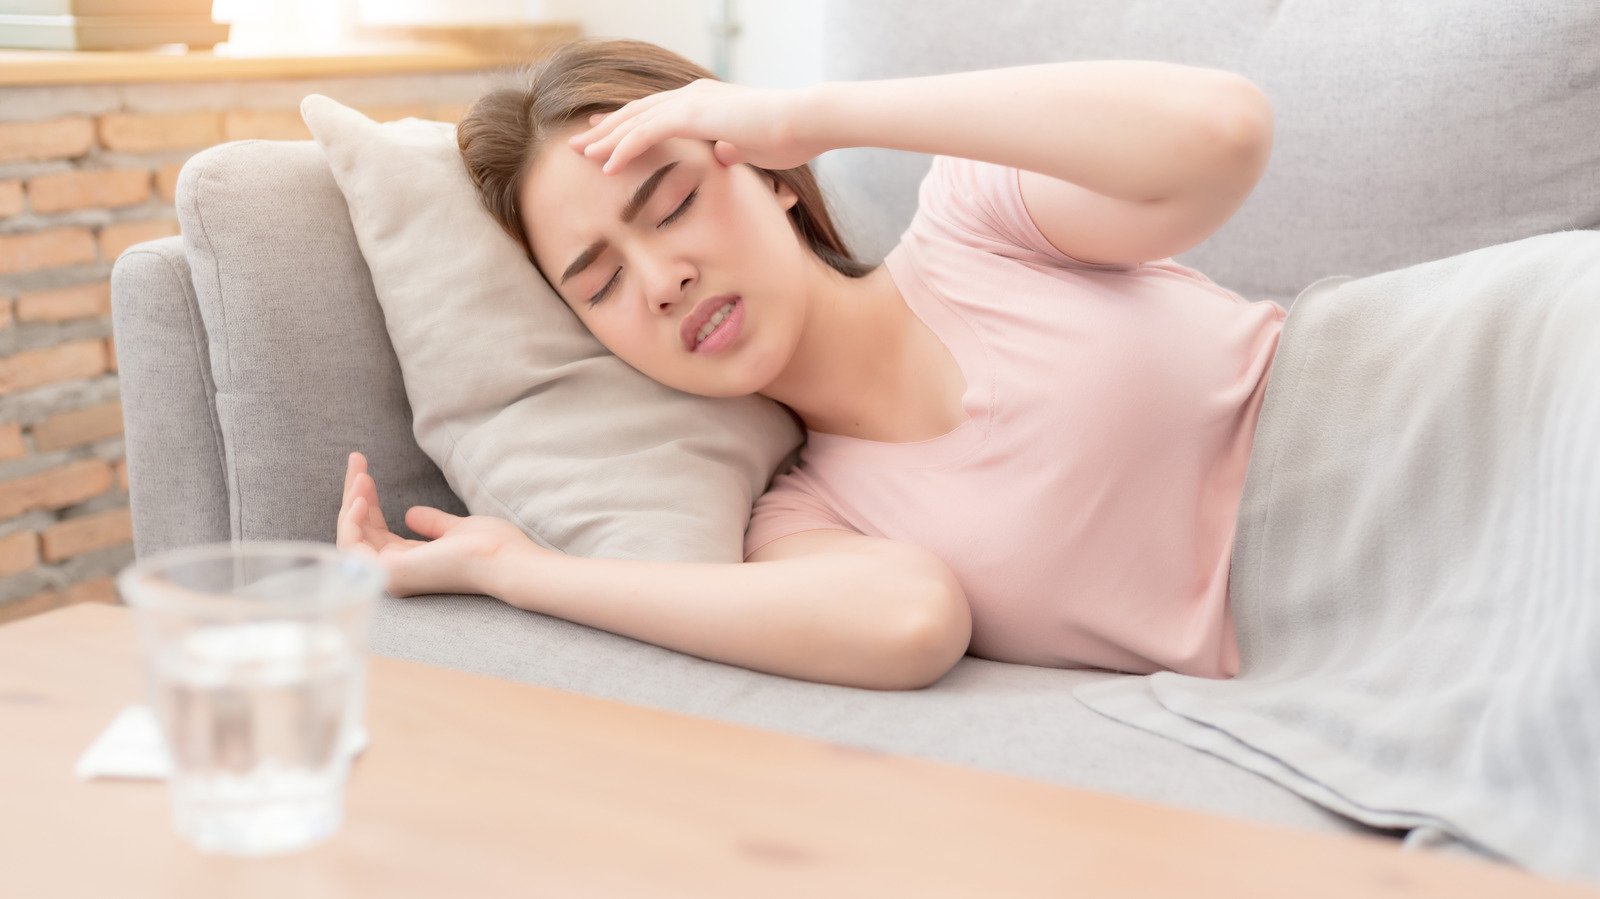 The Real Reason You Need To Drink More Fluids When You're Sick - Health Digest